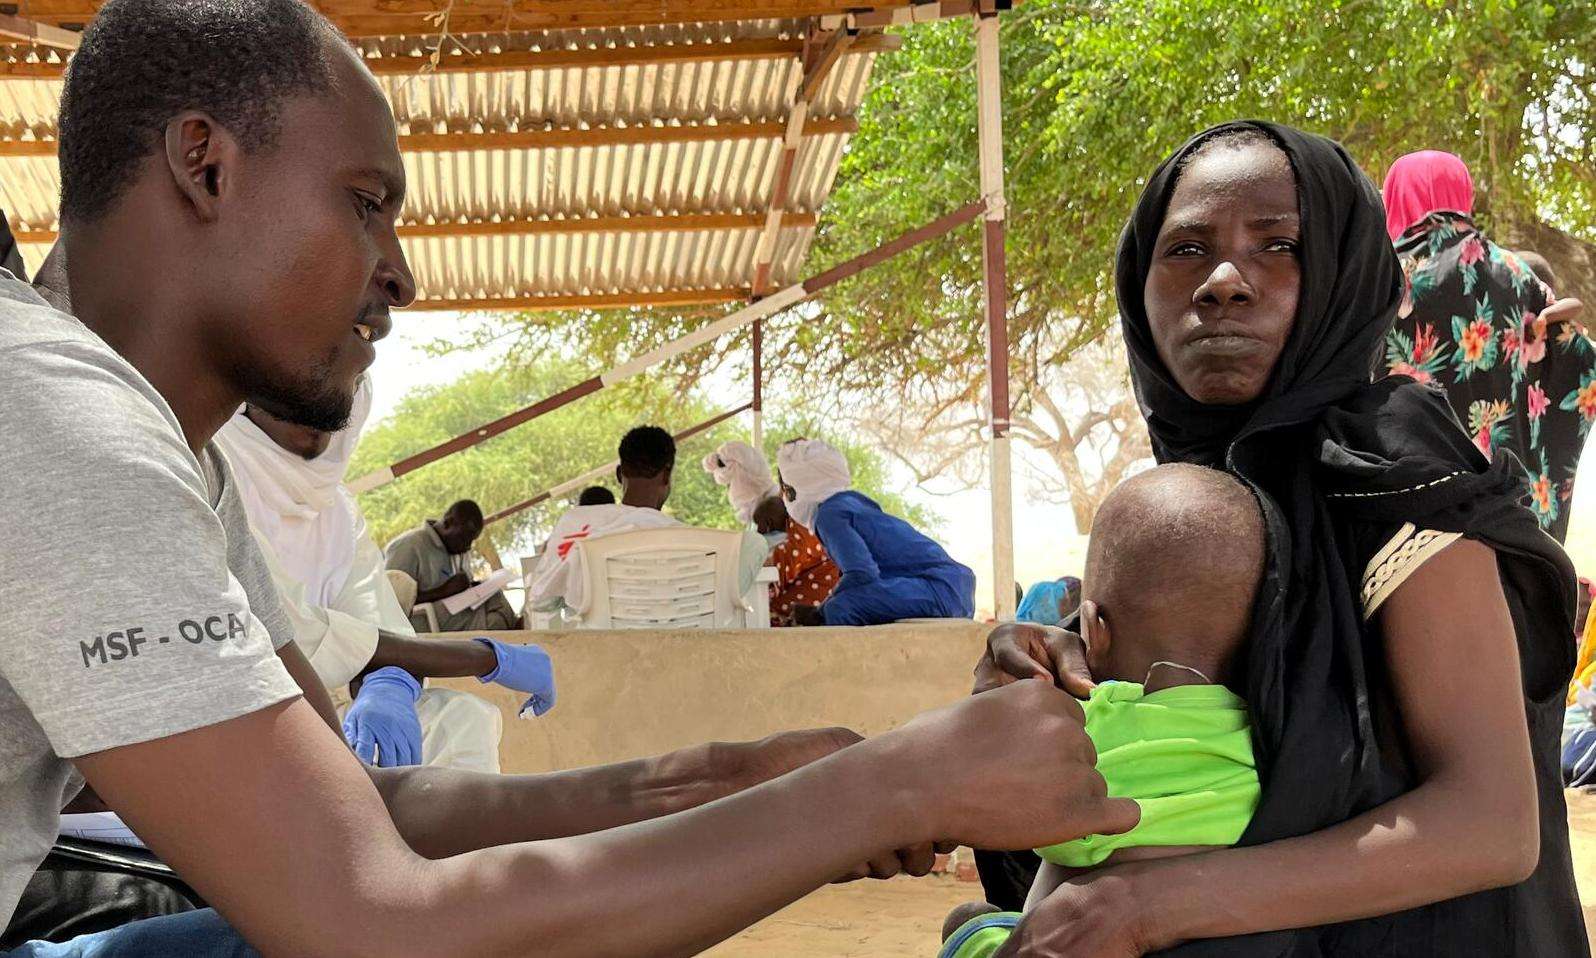 A man in a T-shirt with the MSF emblem is treating a child sitting in the mother's lap.